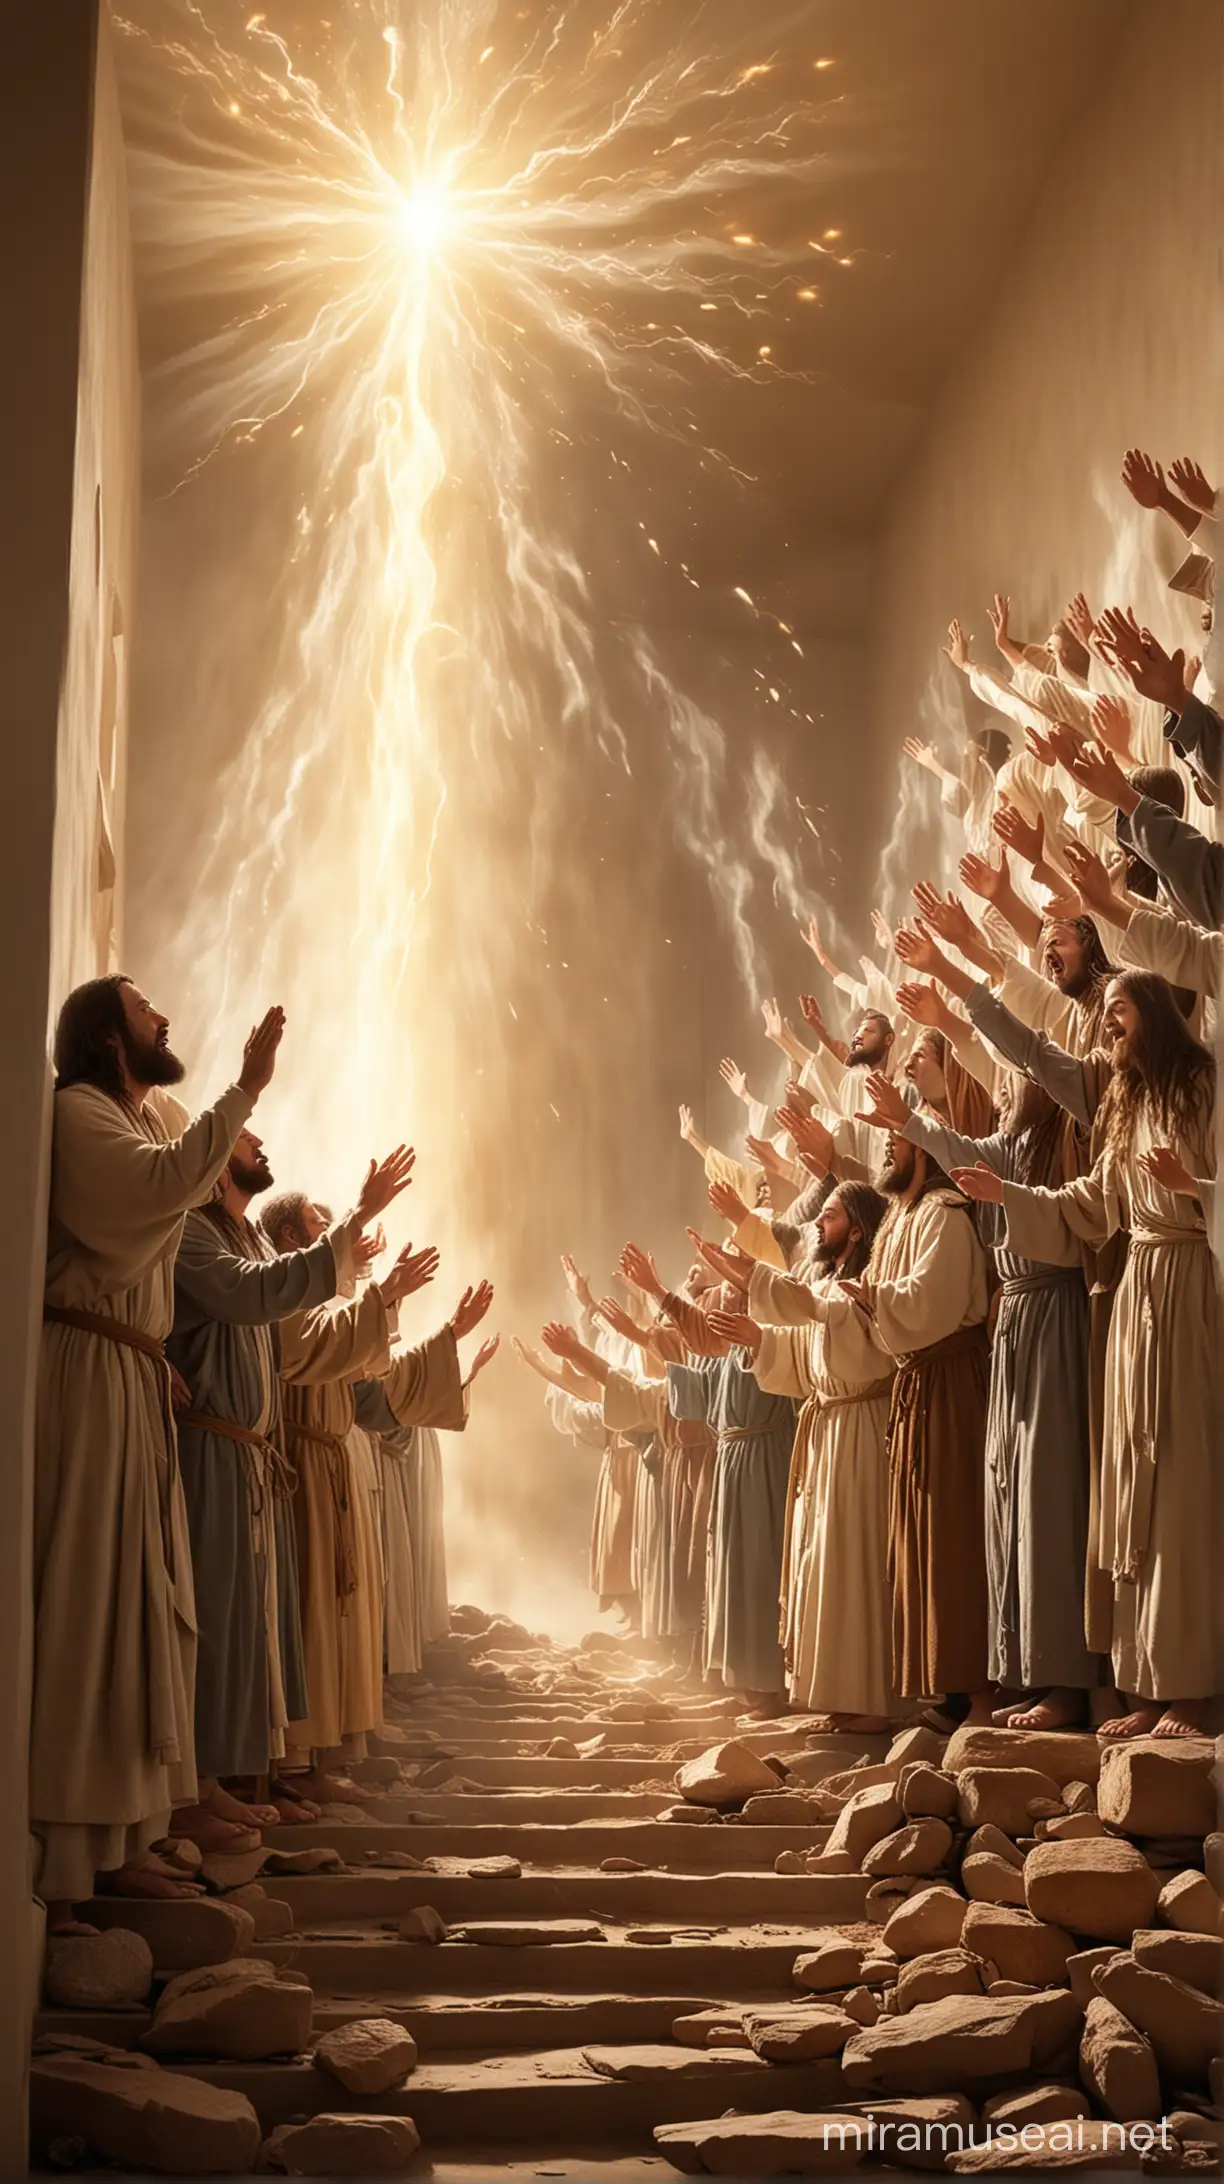 Many "Disciples of jesus praying aggressively and lifting up their hands " in an upstair room, and a bright light moving over their heads", with a very bright light and fire and A " mighty rushing wind" blowing across them 
